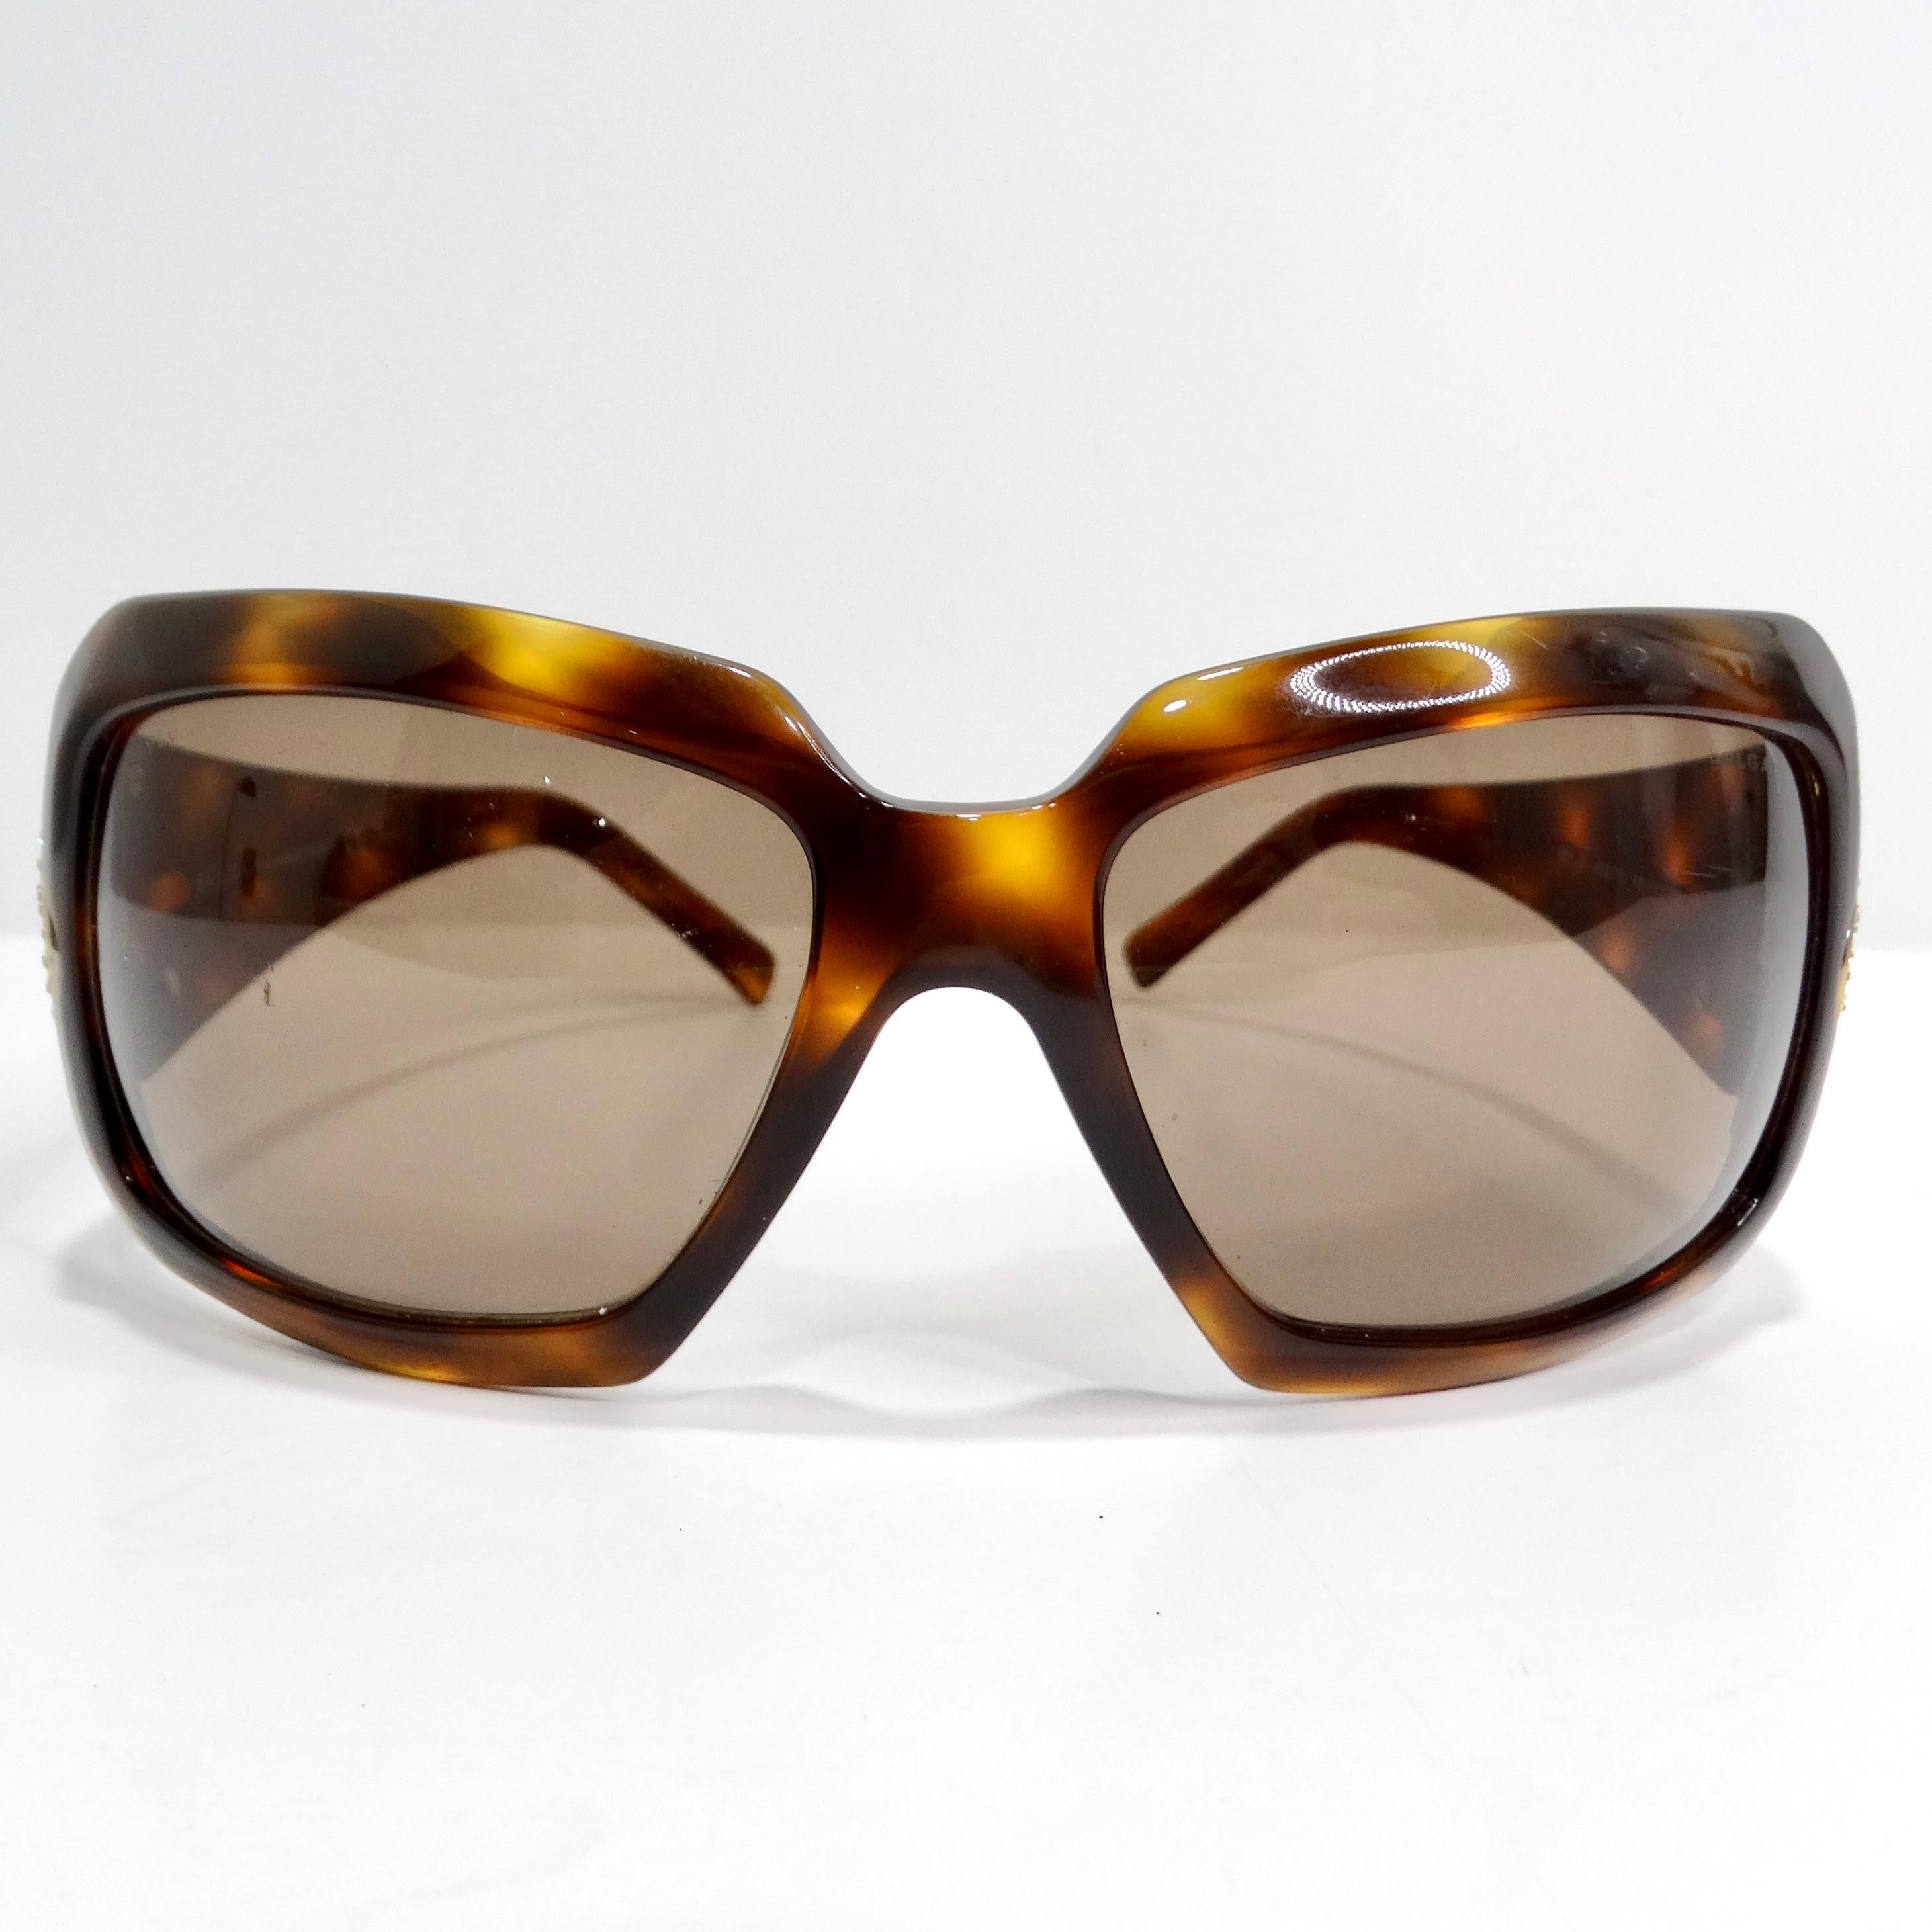 Introducing the Bulgari Y2K Tortoise Shell Sunglasses, a perfect blend of classic style and luxurious glamour. These sophisticated sunglasses feature a timeless brown tortoise shell pattern with sleek rectangular frames, making them a versatile